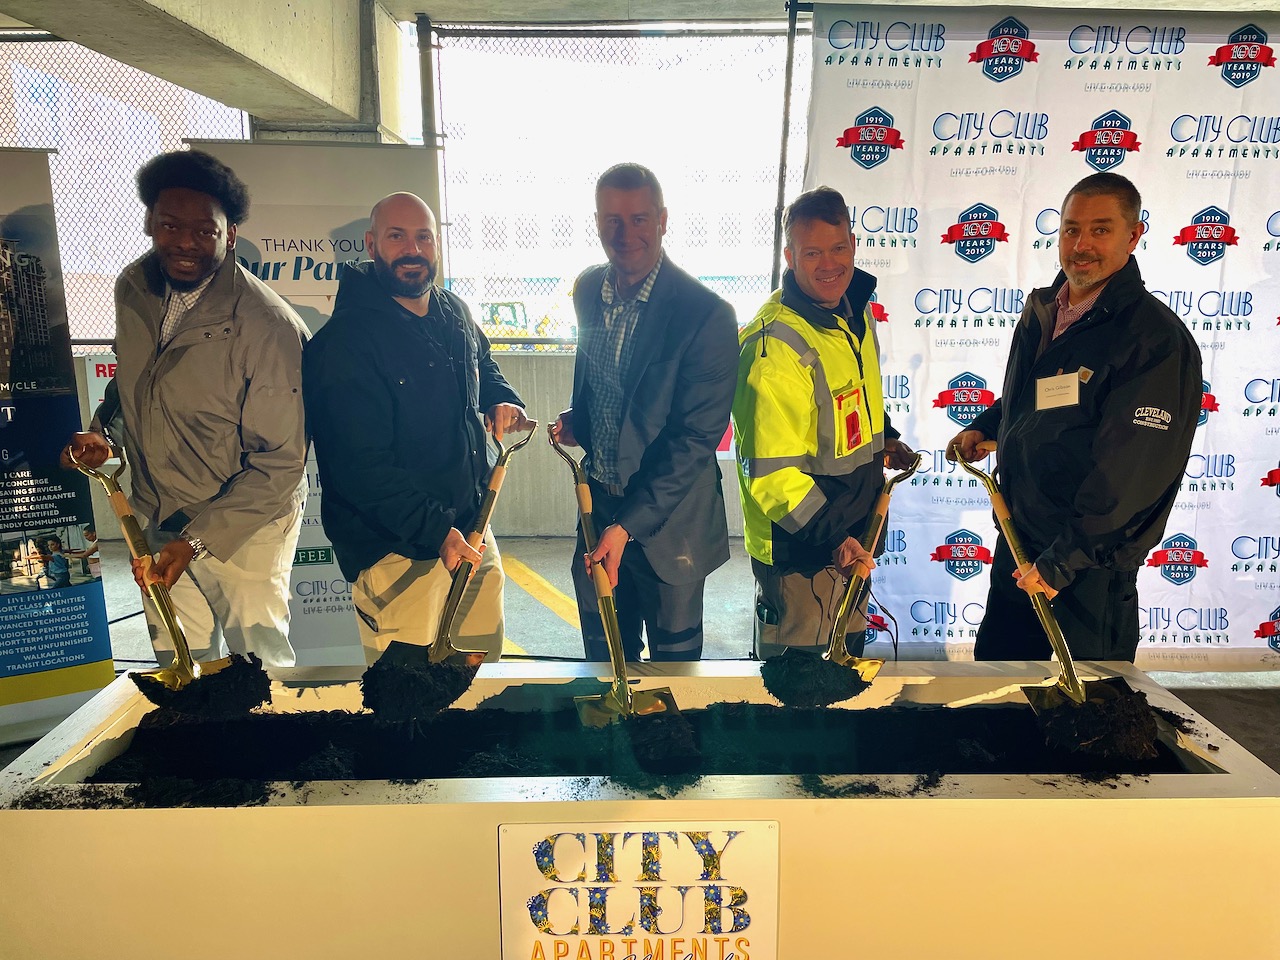 City Club Apartments Breaks Ground in Cleveland